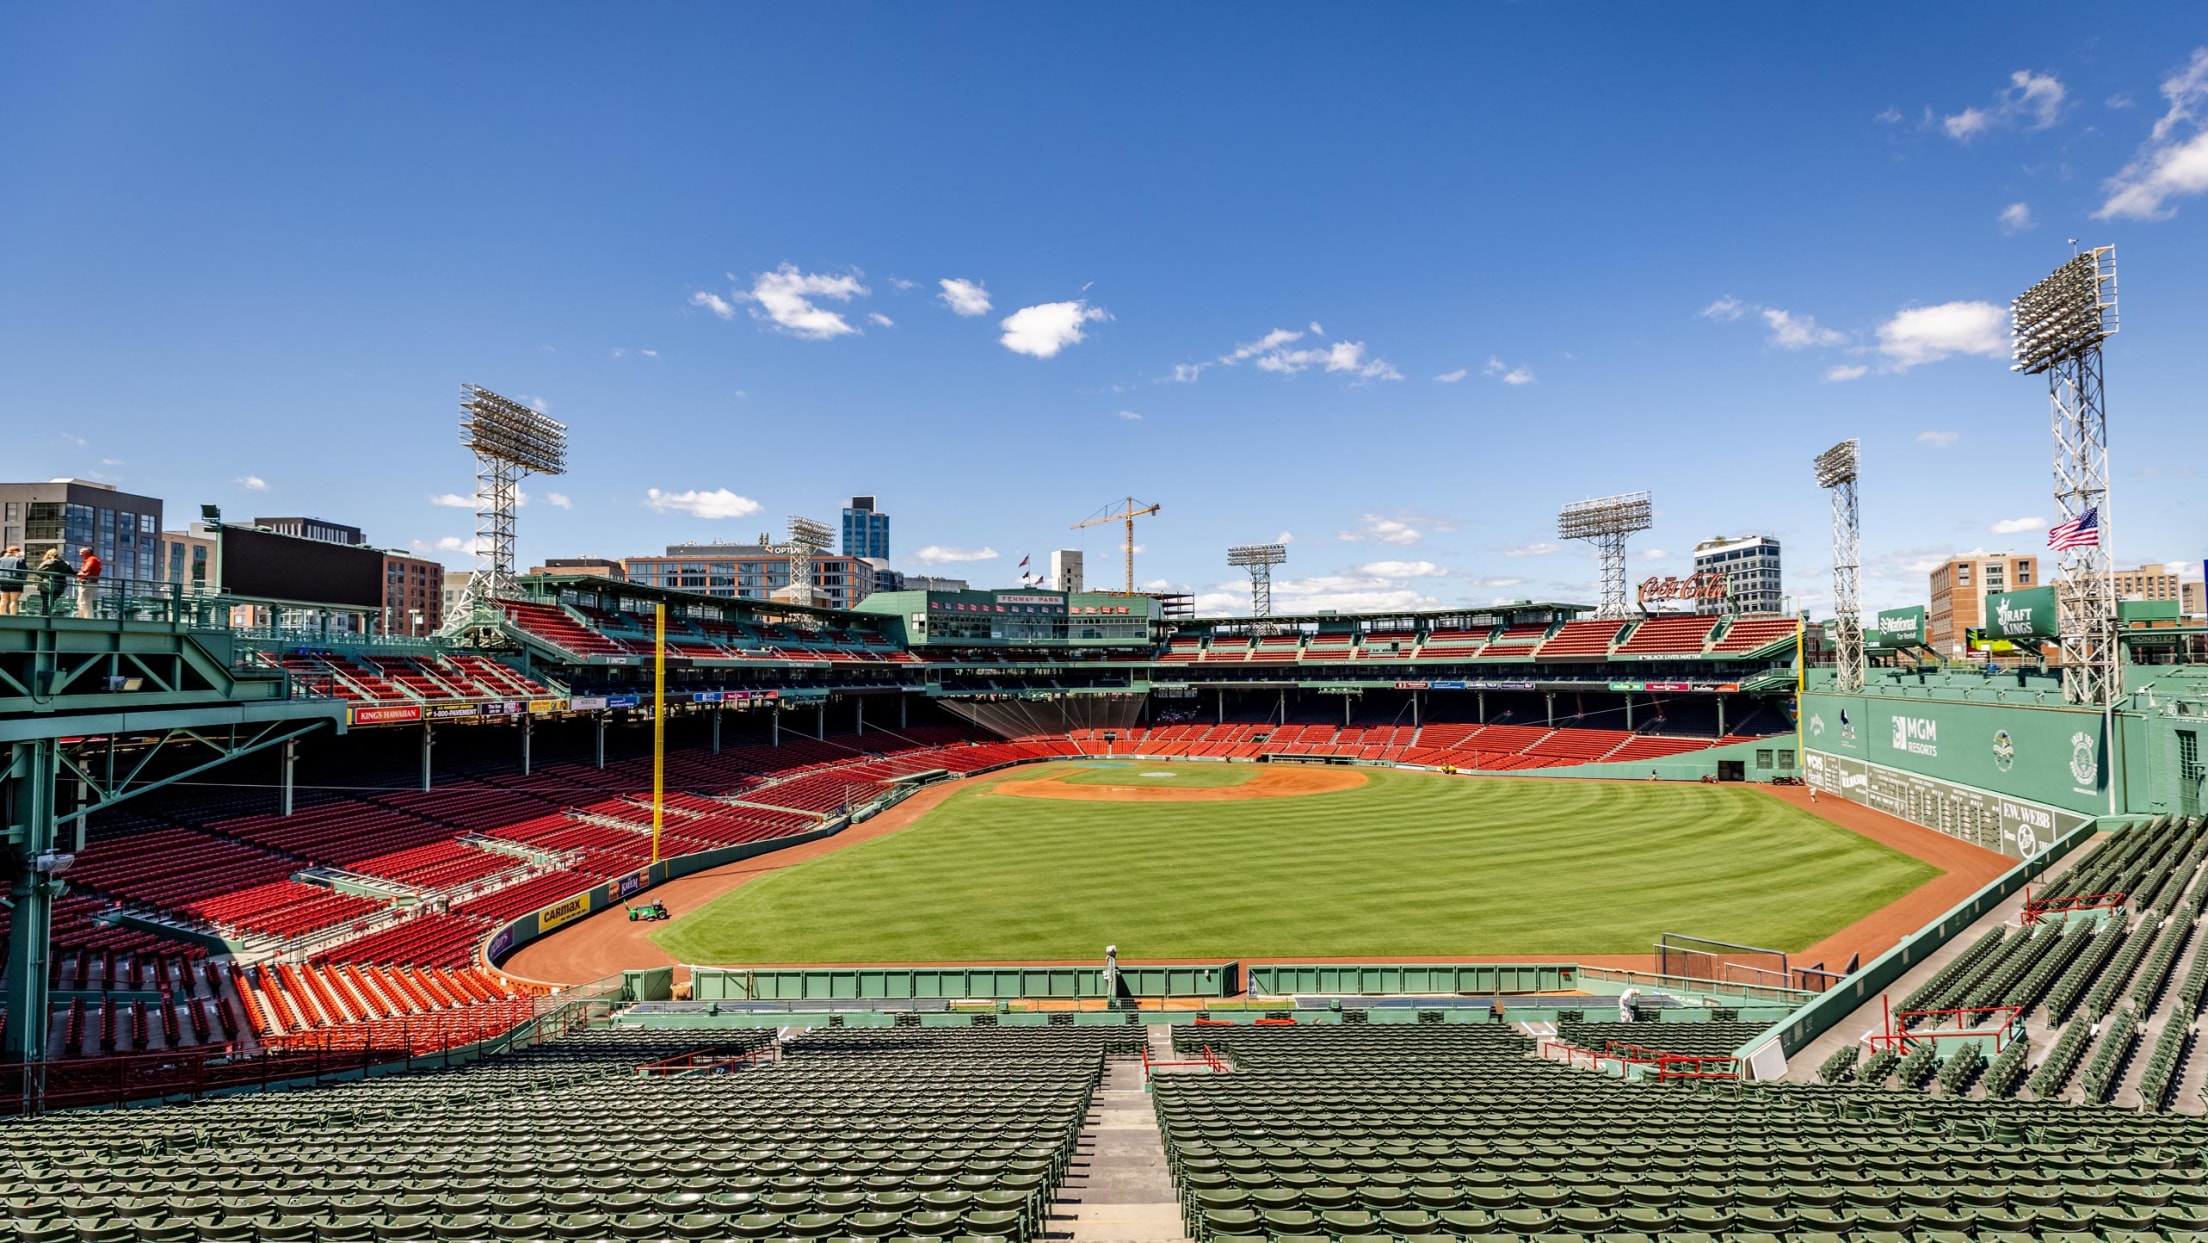 Display event - Realtor Day At Fenway